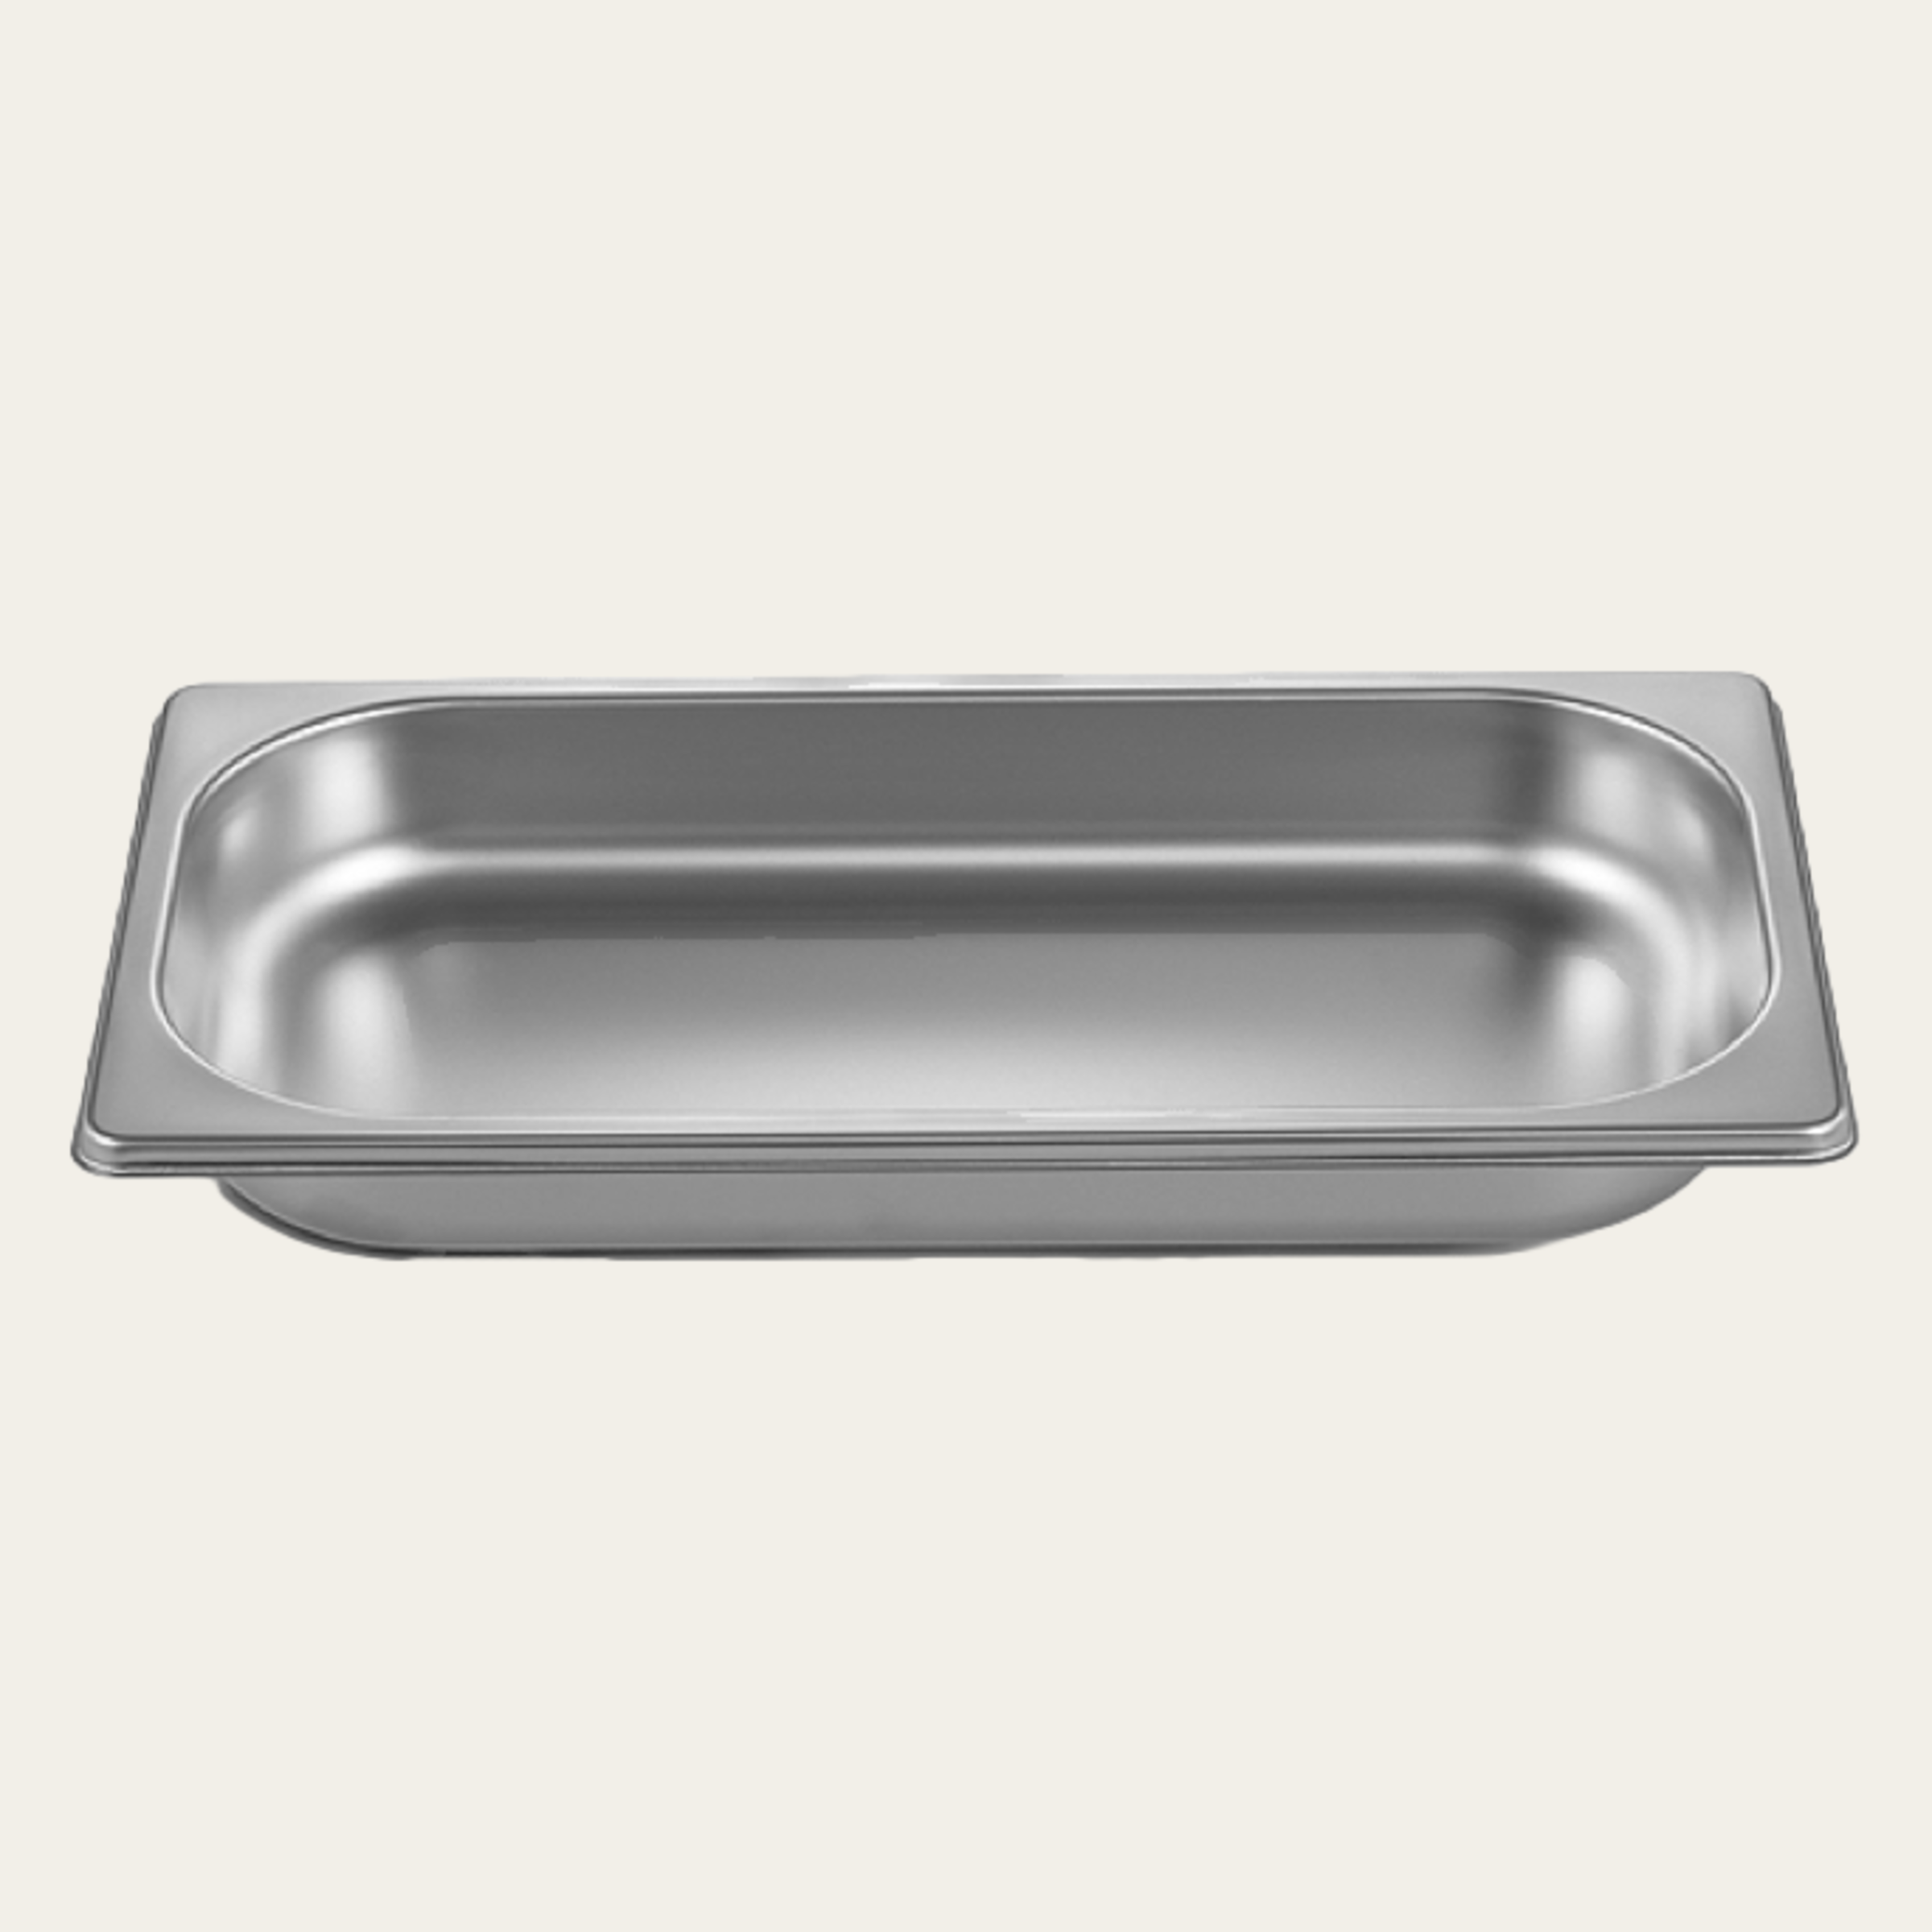 Cooking tray GN1/3, height 40mm, unperforated, packed